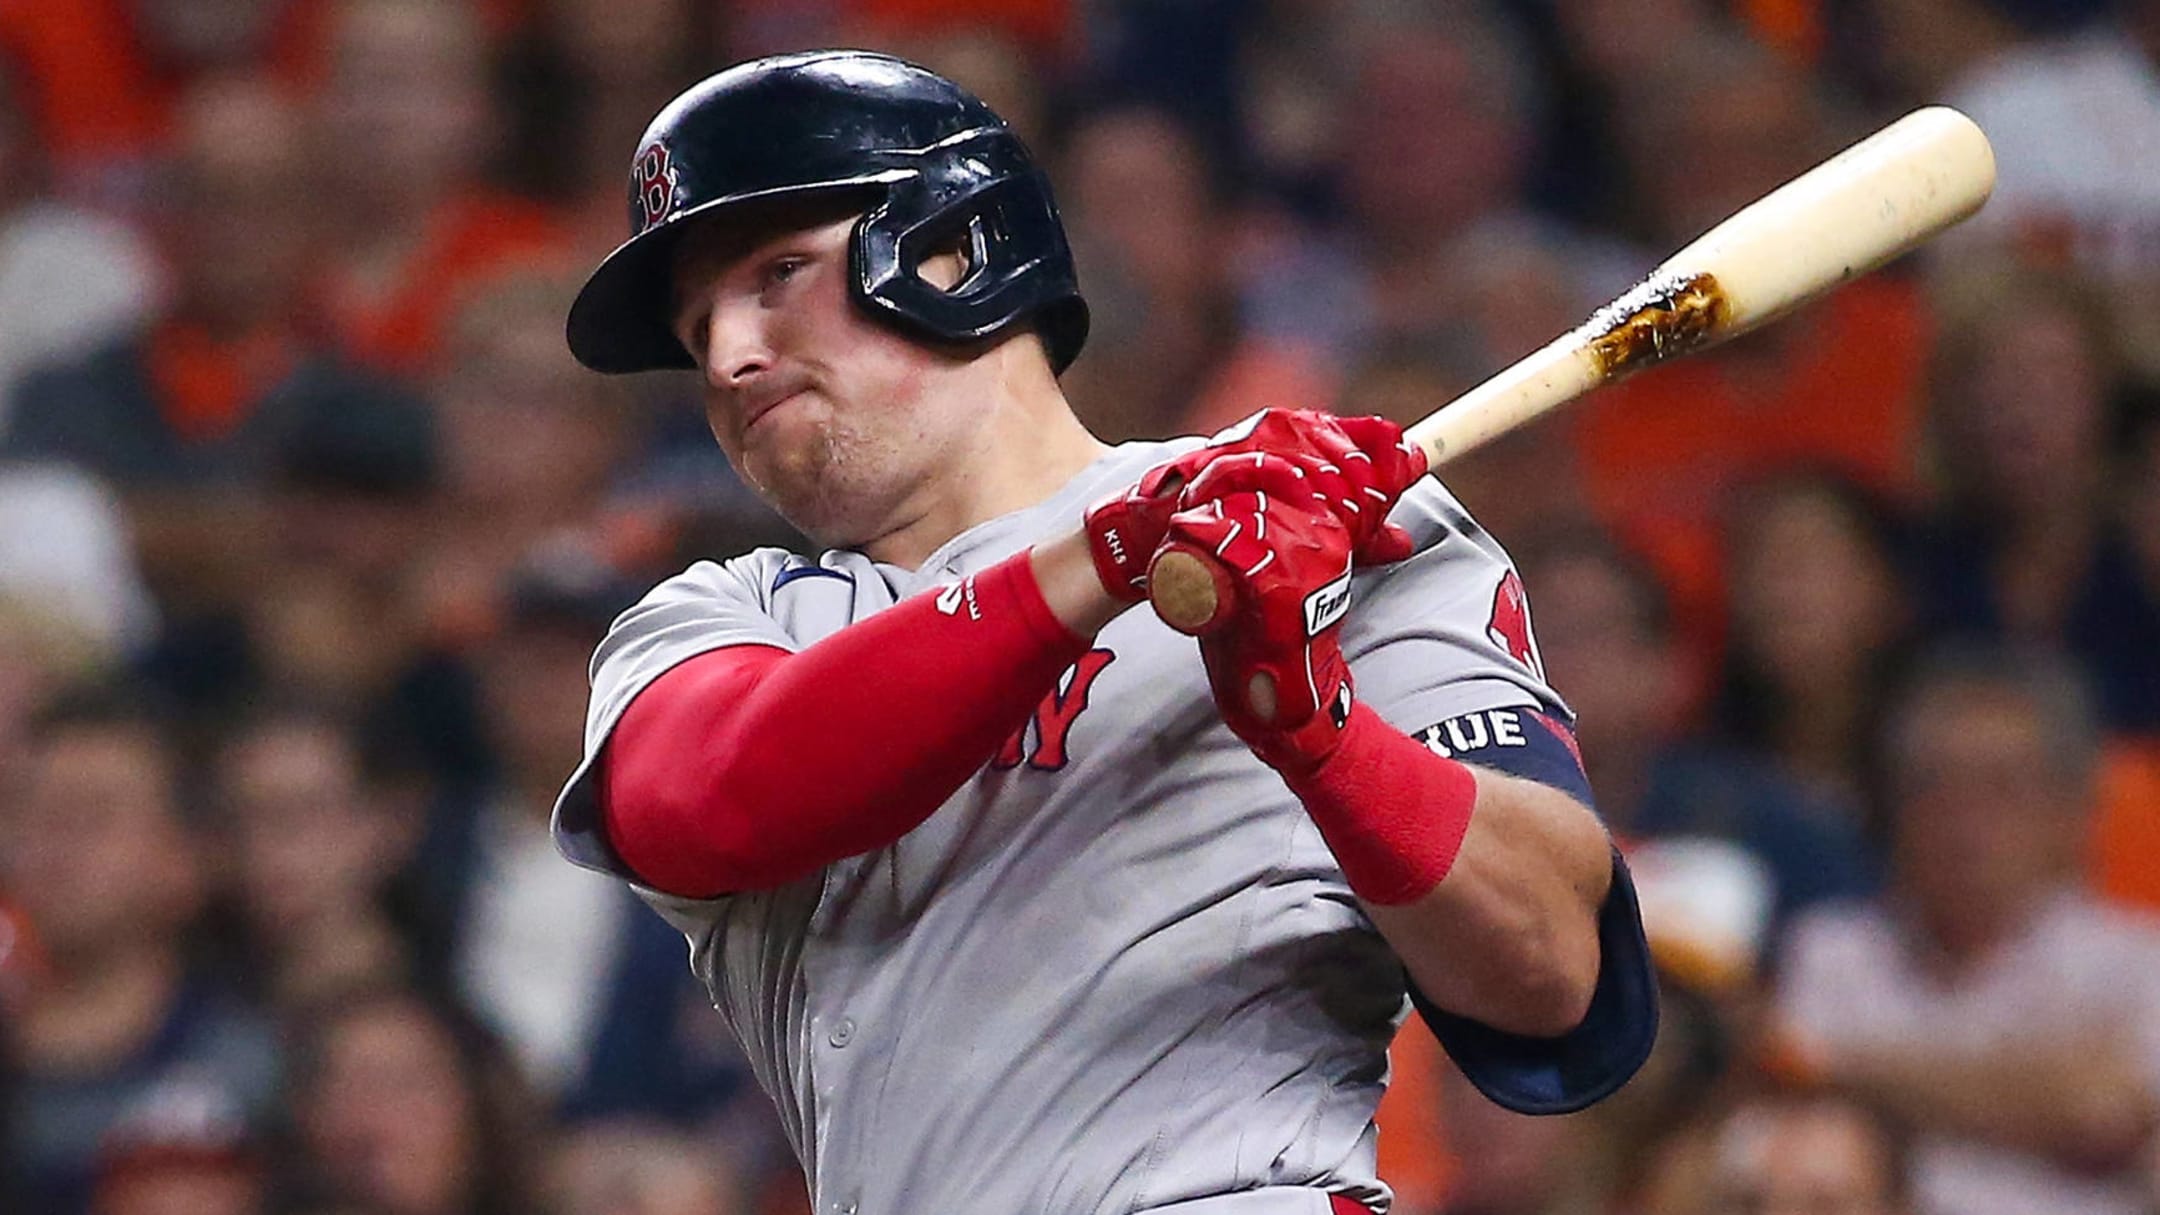 Red Sox sign slugging OF Renfroe for 1 year, $3.1M